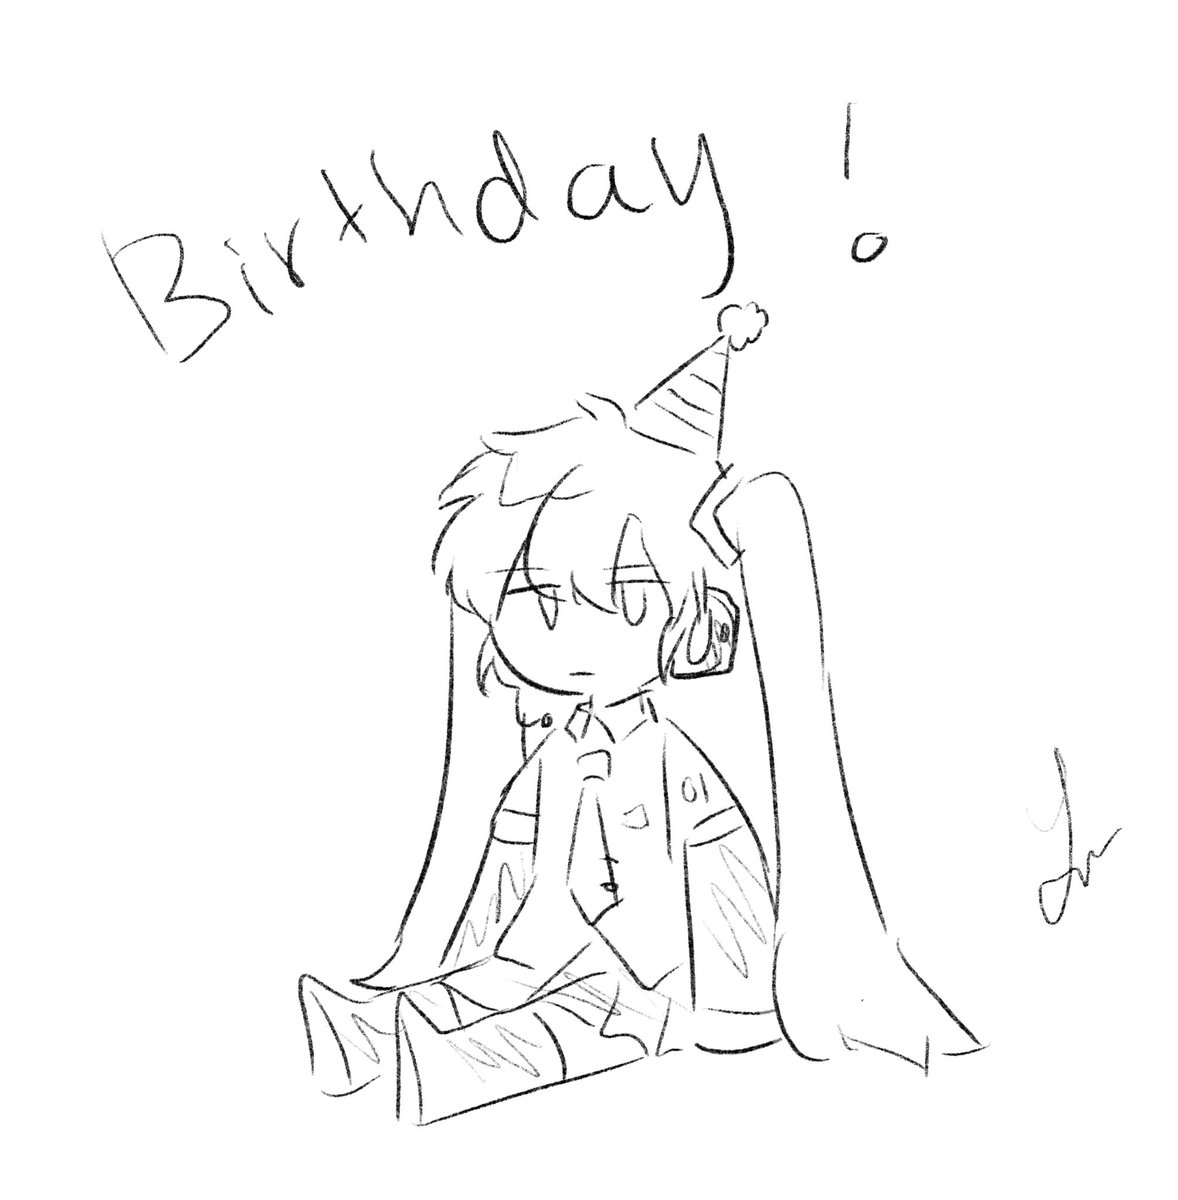 i forgot to draw smth for miku's bday which was like a month ago so here's this 